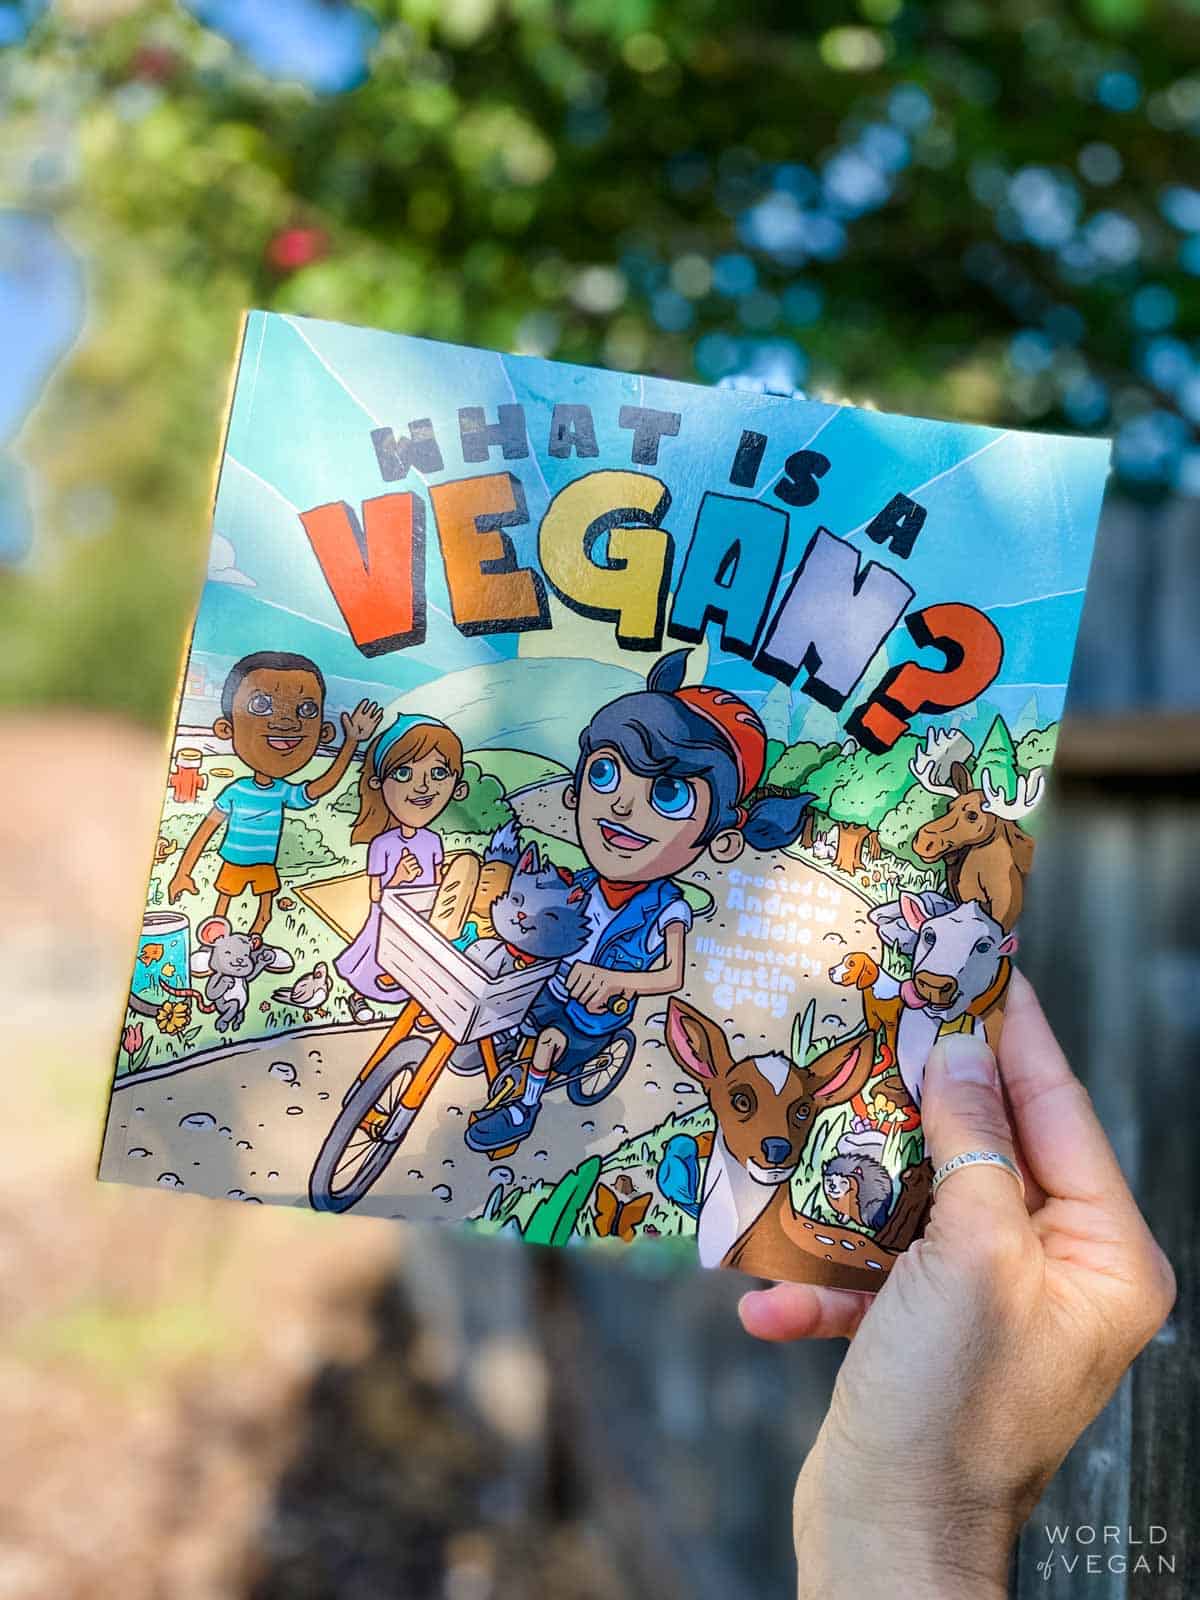 Holding the "What is a vegan?" children's book outside in the garden. 